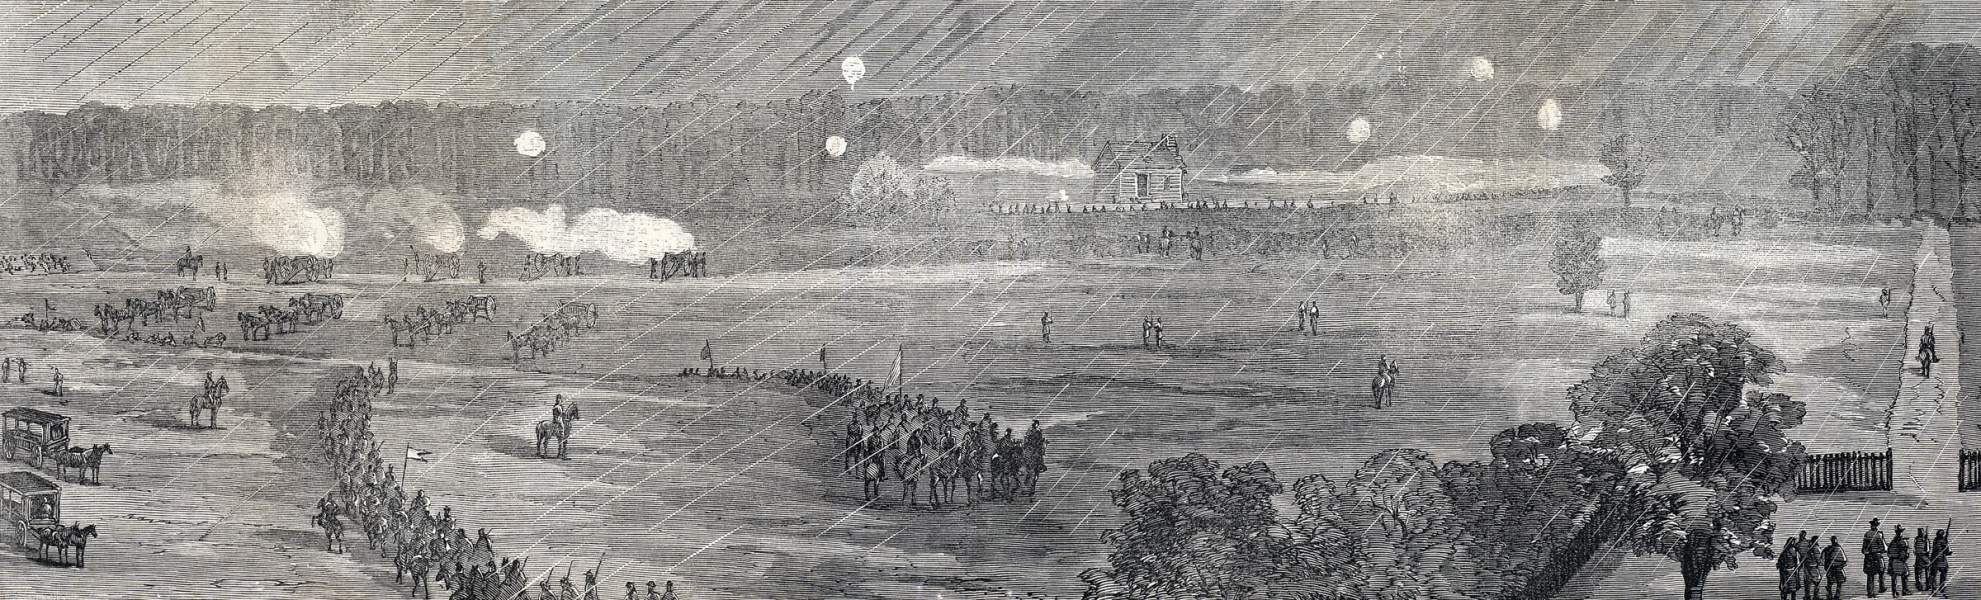 Battle of Fair Oaks and Darbytown Road, Virginia, October 27, 1864, artist's impression, zoomable image